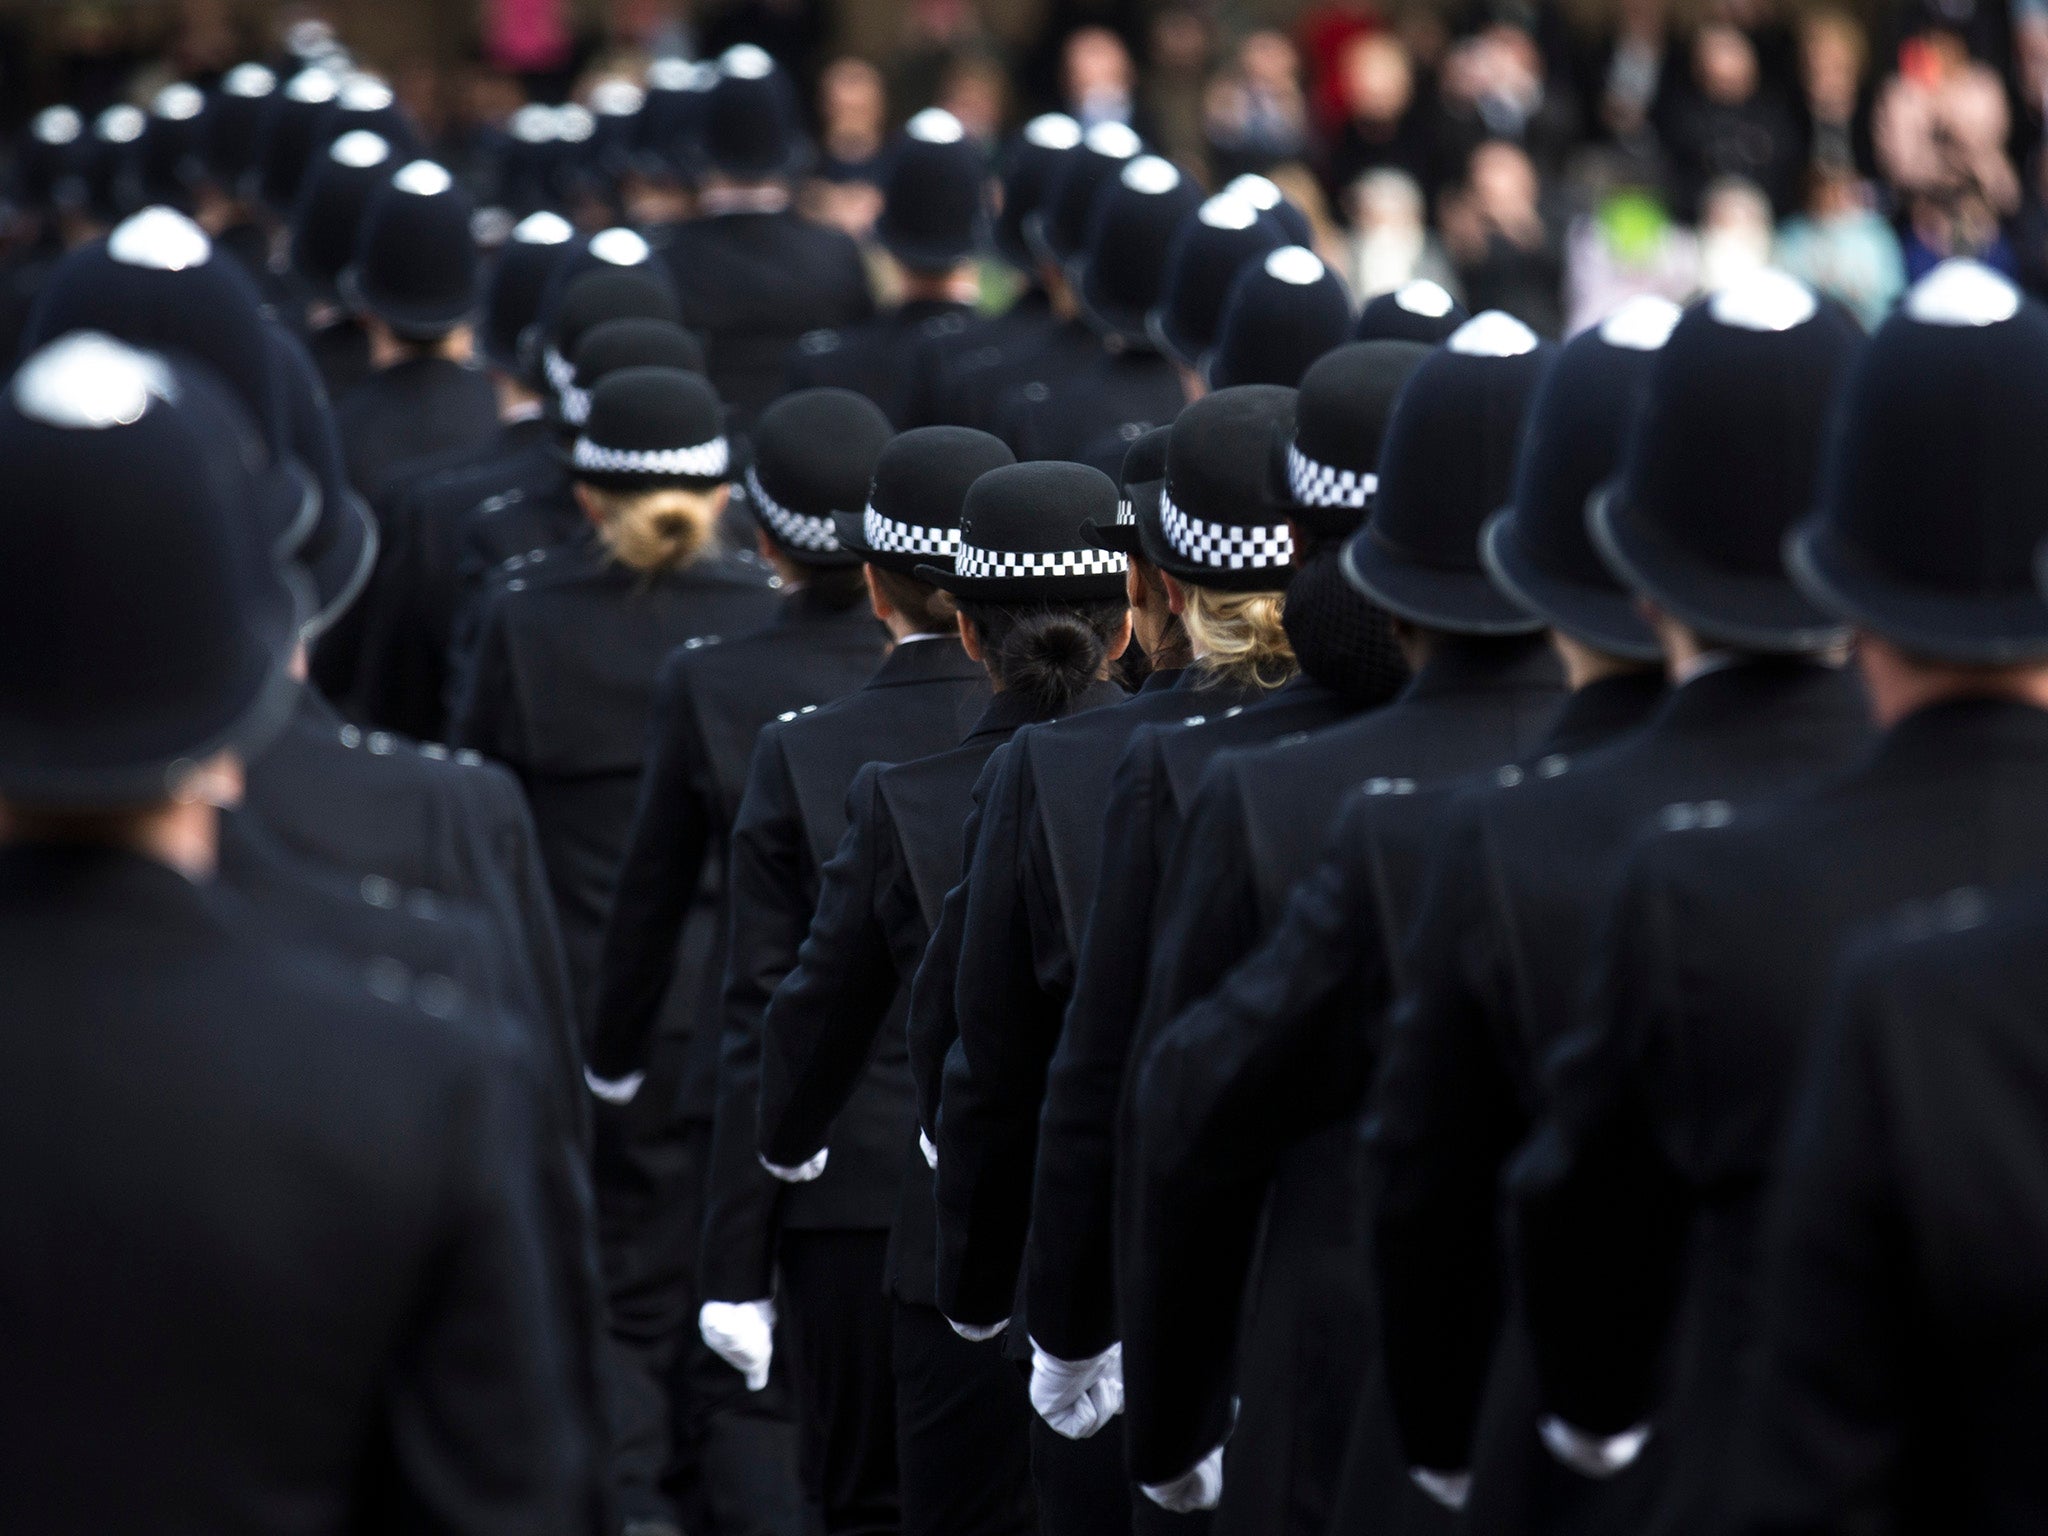 Despite efforts to recruit 20,000 extra officers, the number of resignations has been rising